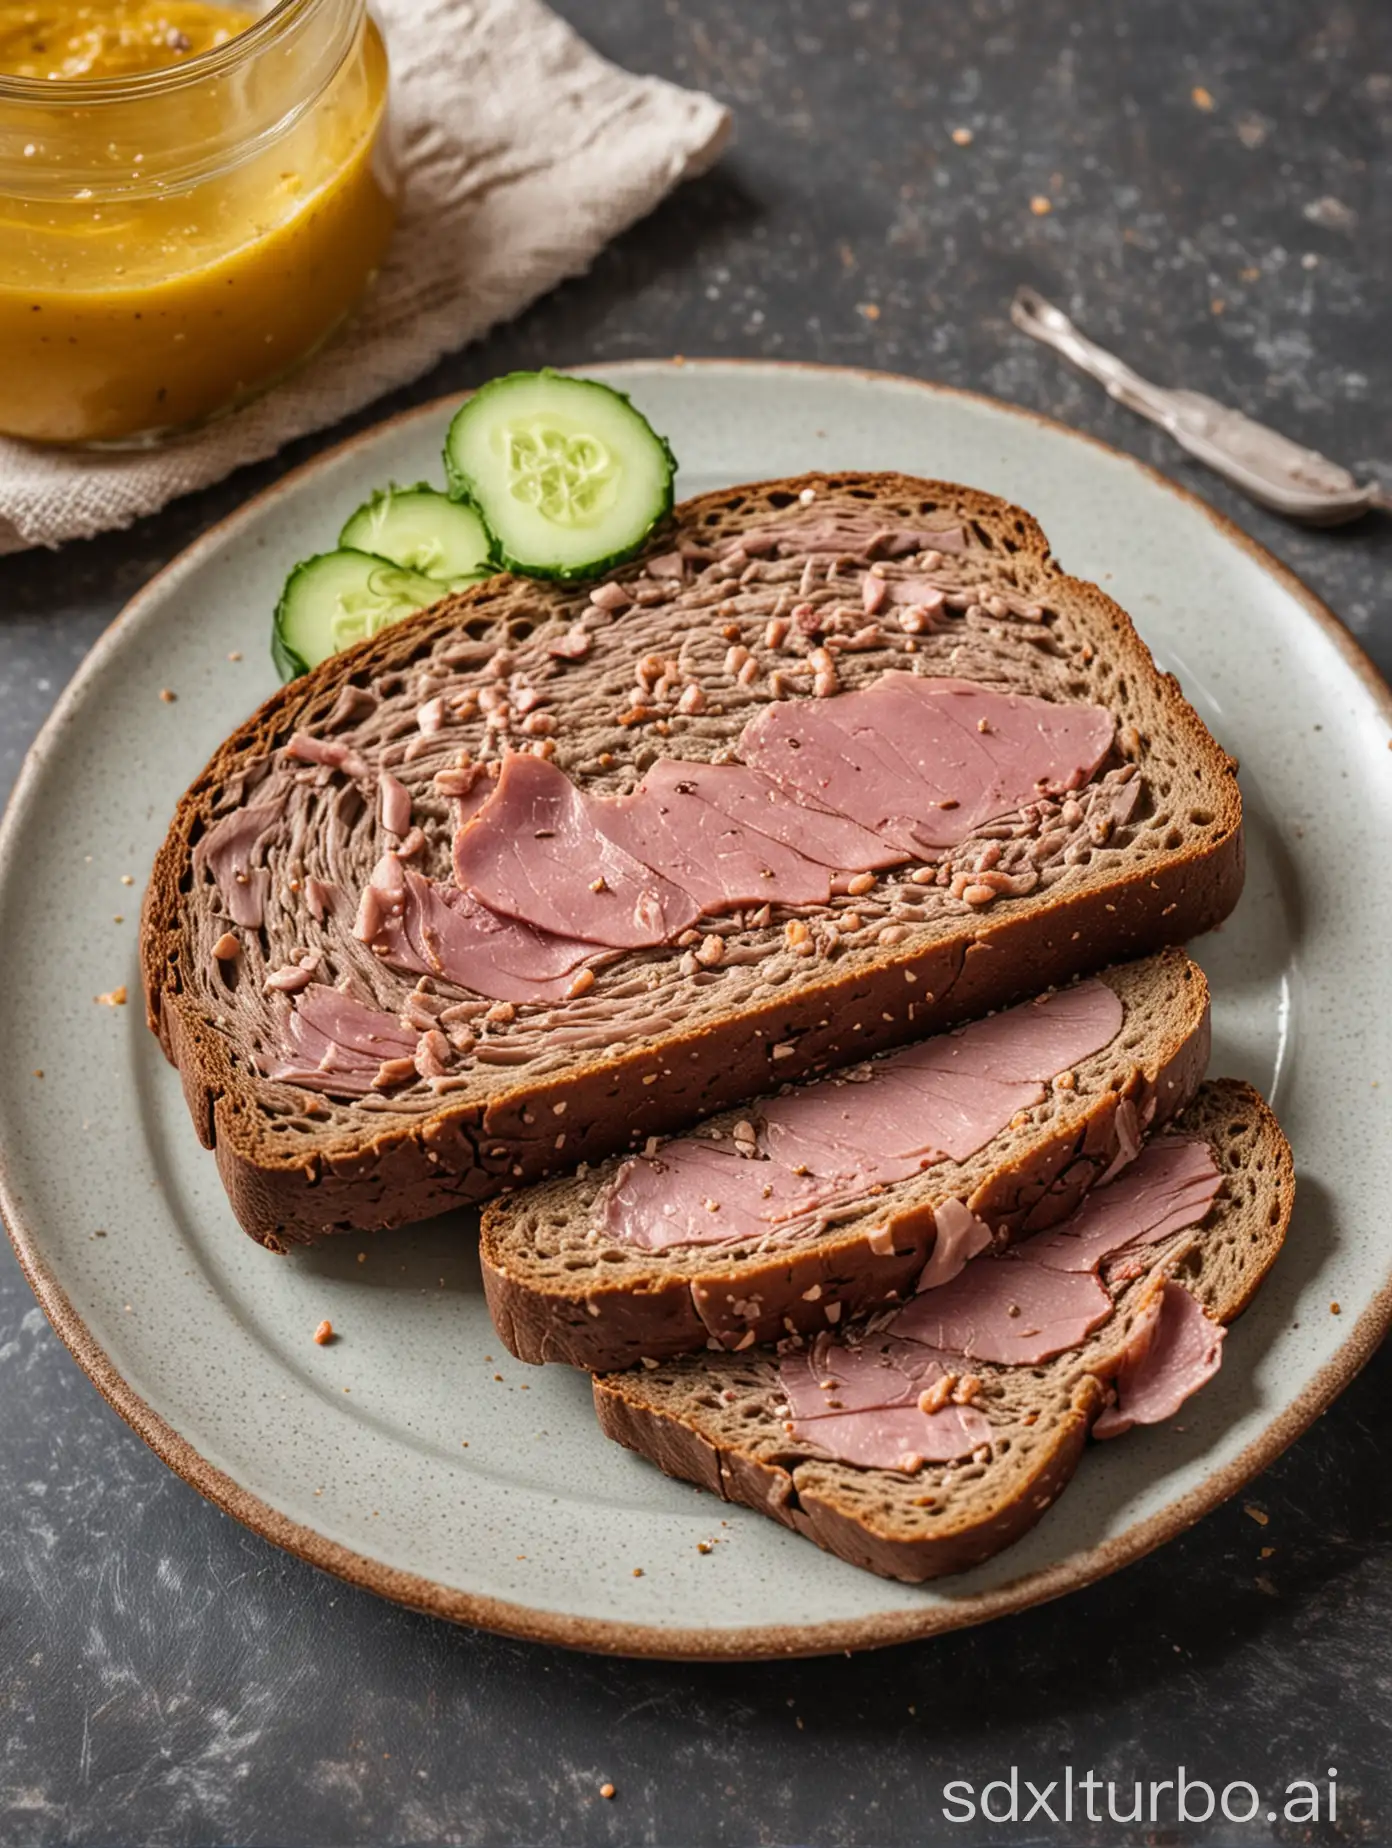 German-Black-Bread-with-Ham-Cucumber-and-Mustard-Rustic-Plate-Presentation